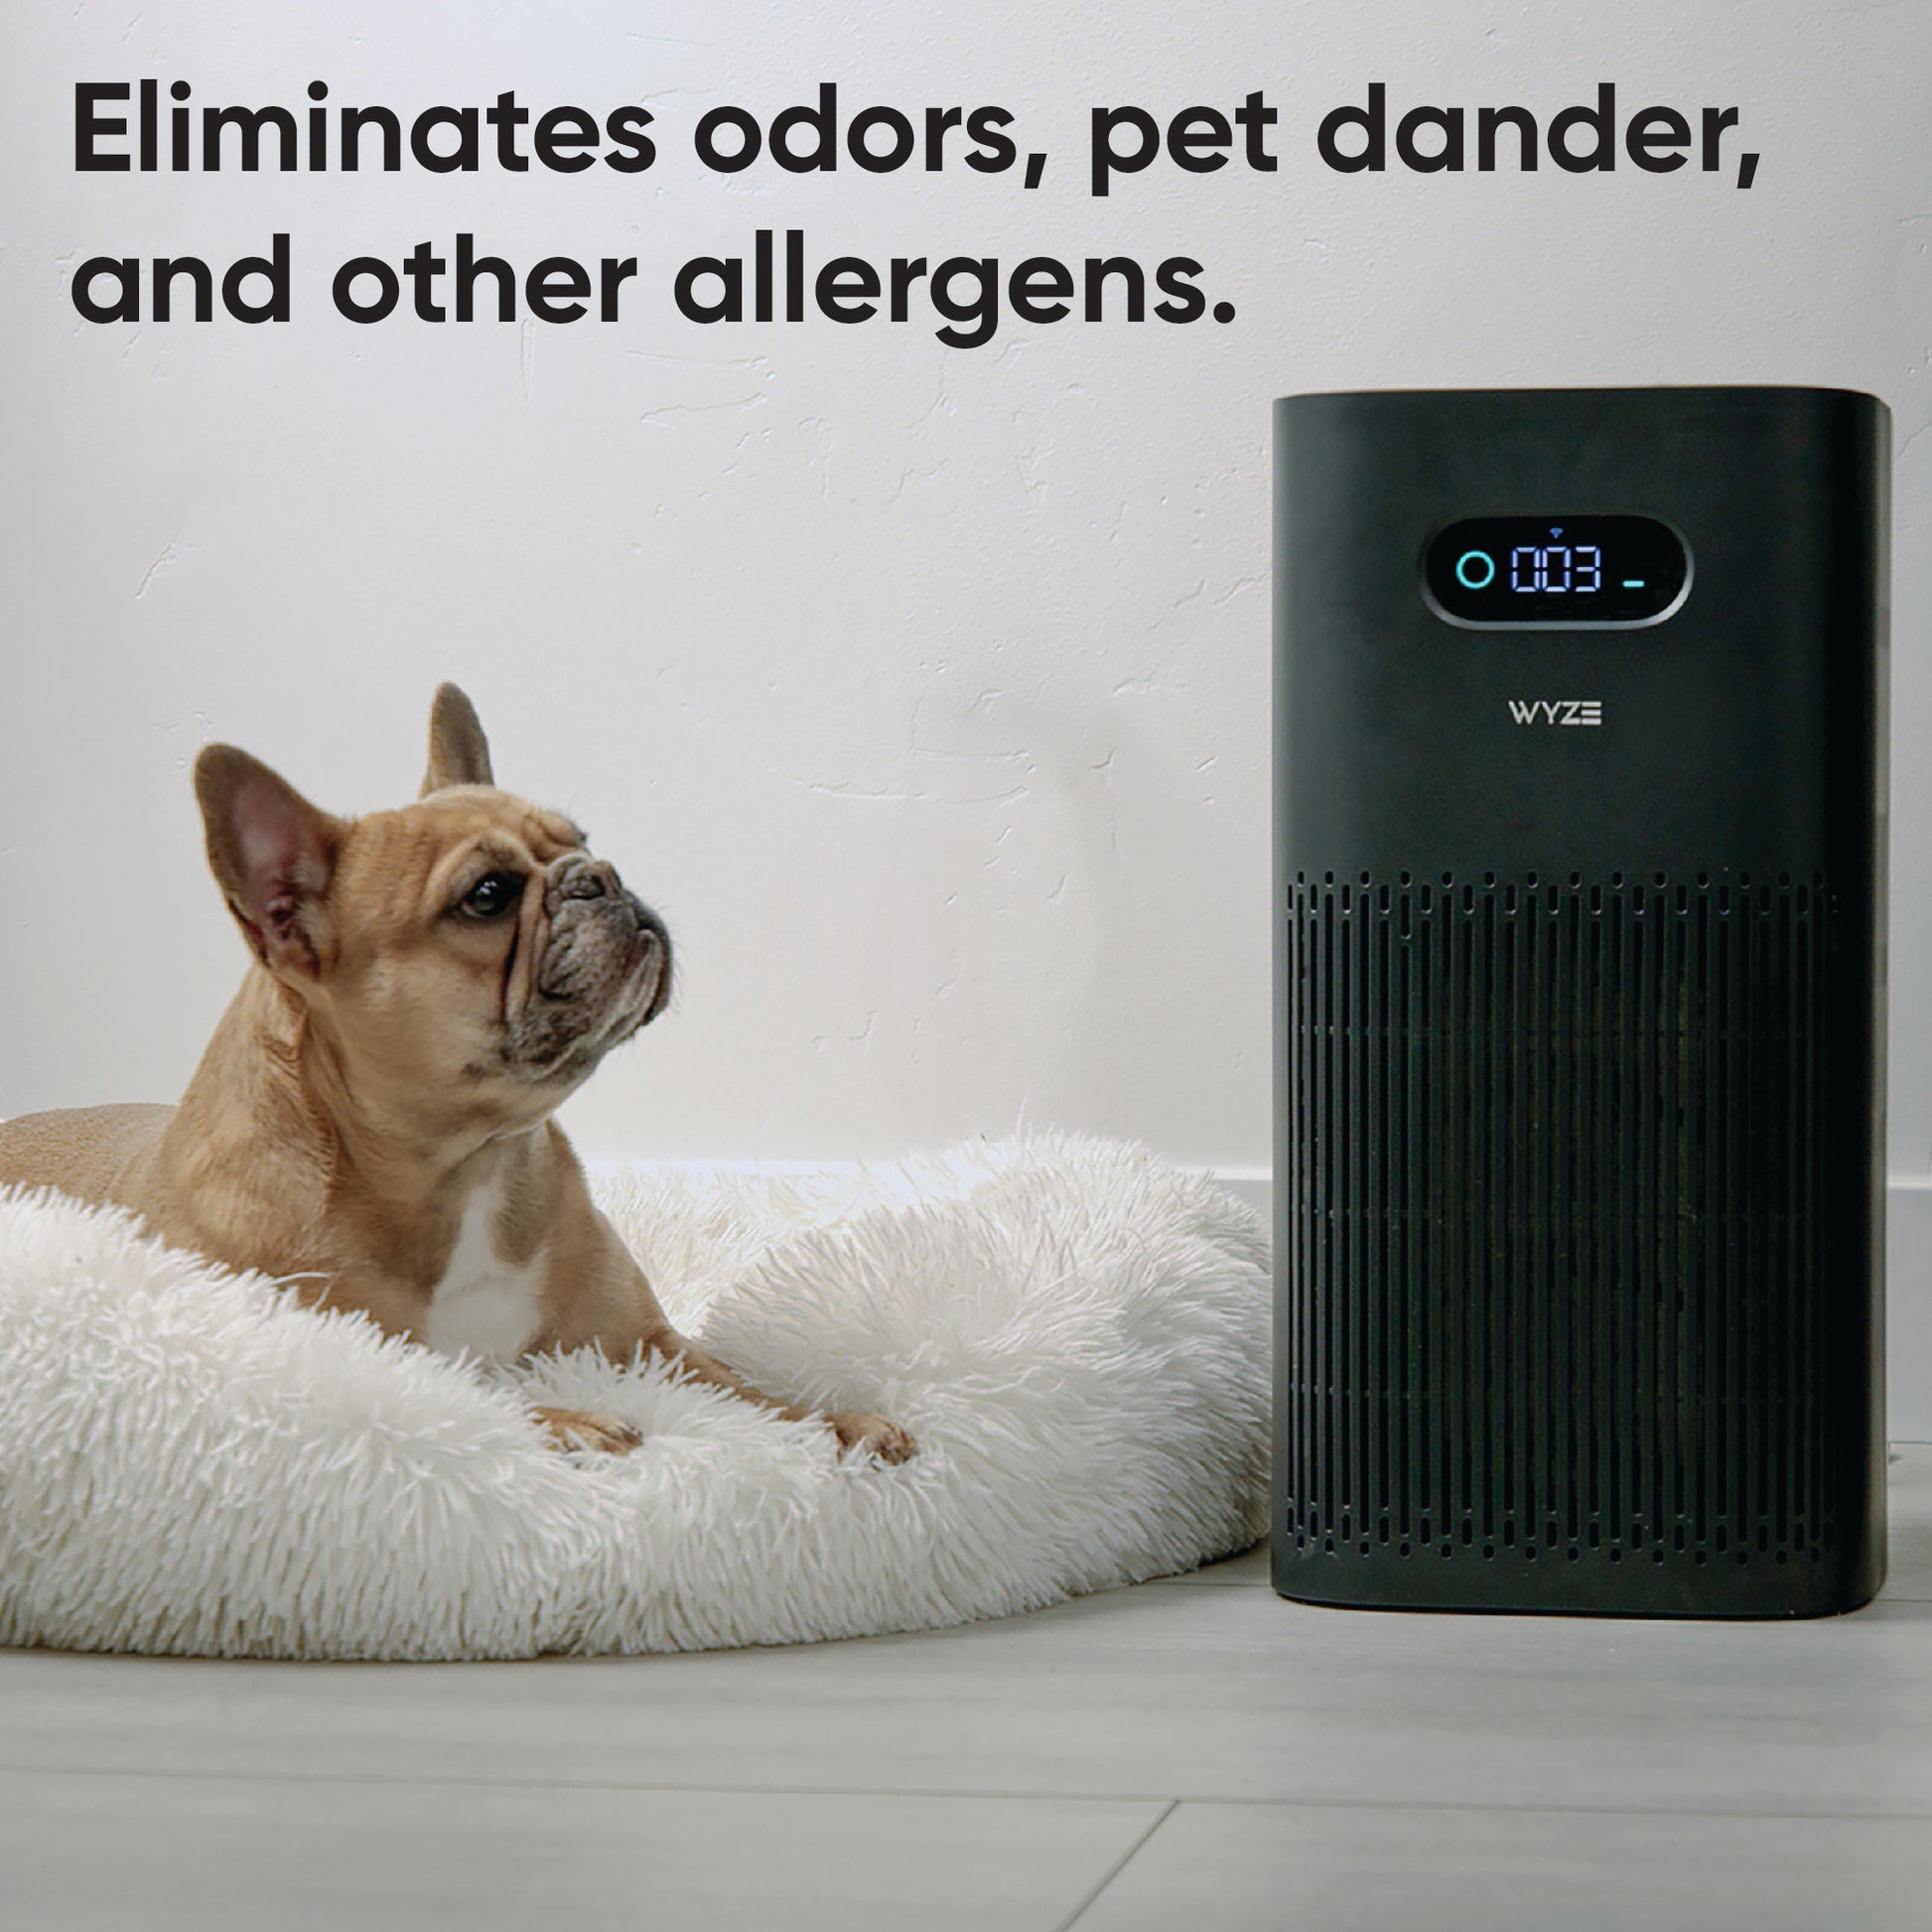 Dog lounging on a dog bed next to the Wyze Air Purifier. Black text overlay that says "eliminates odors, pet dander, and other allergens."